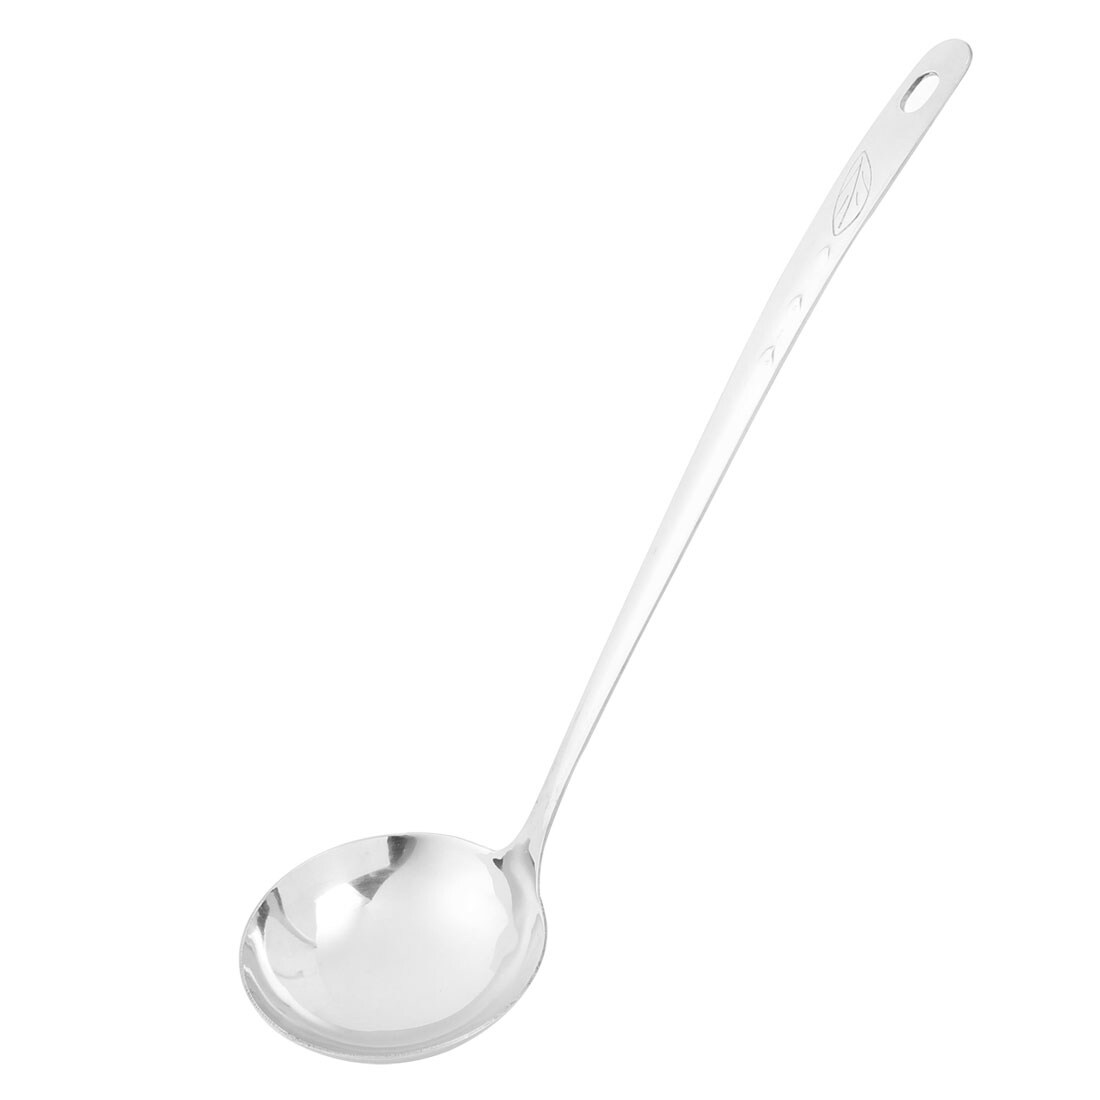 Soup Ladle Spoon Scoop Long Handle Stainless Steel Kitchen Cooking Utensils W